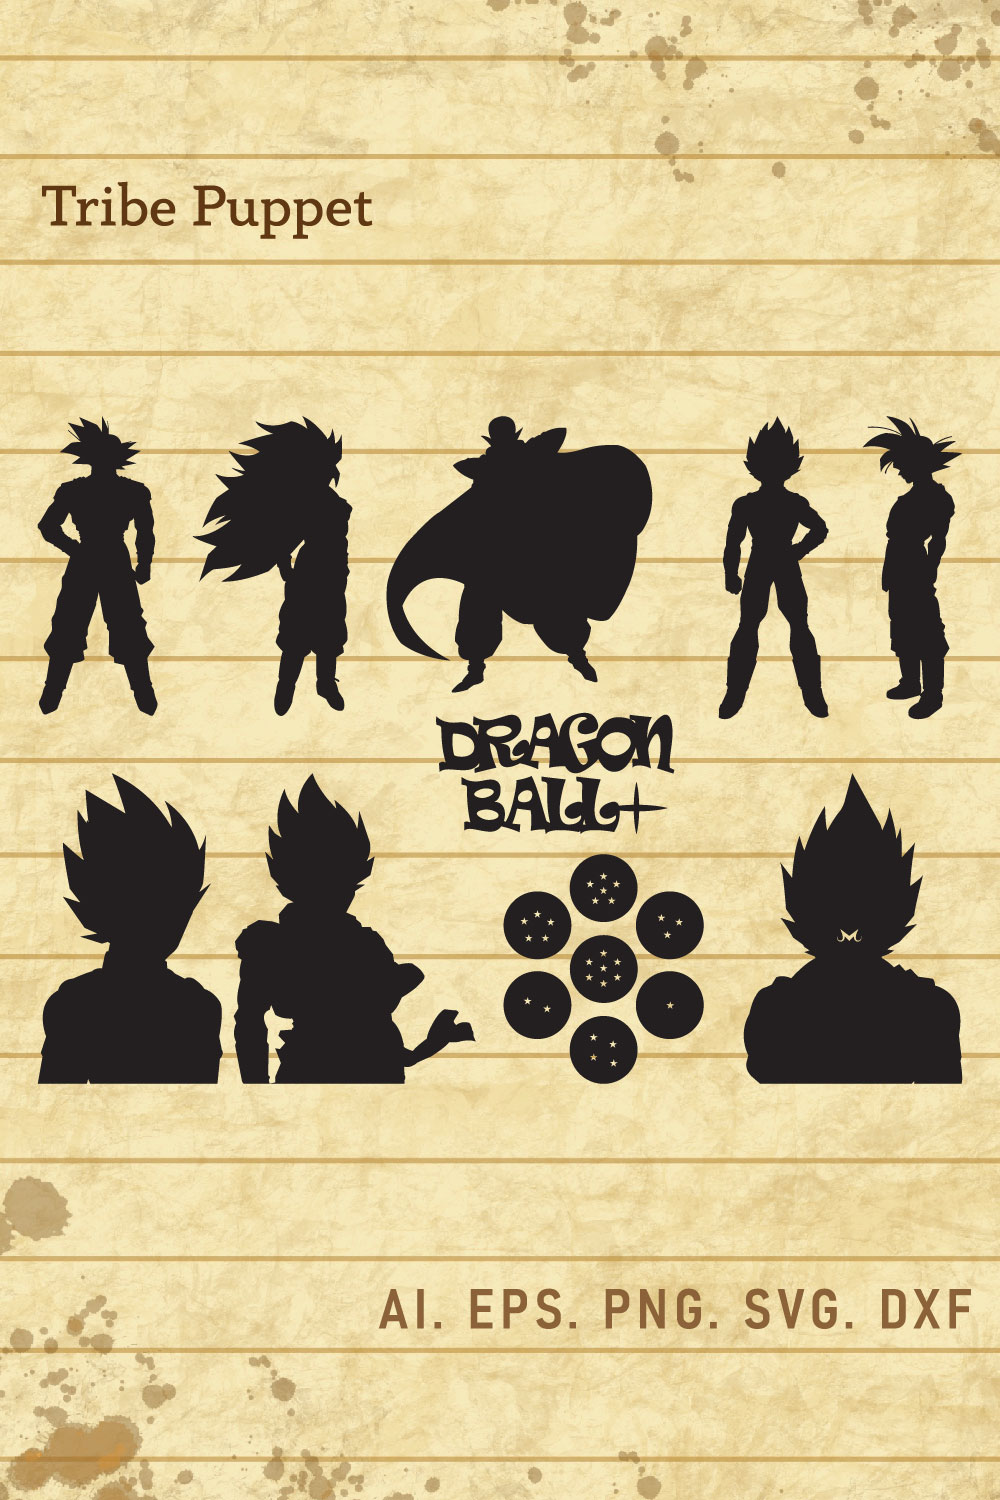 The silhouettes of dragon ball characters on a piece of paper.